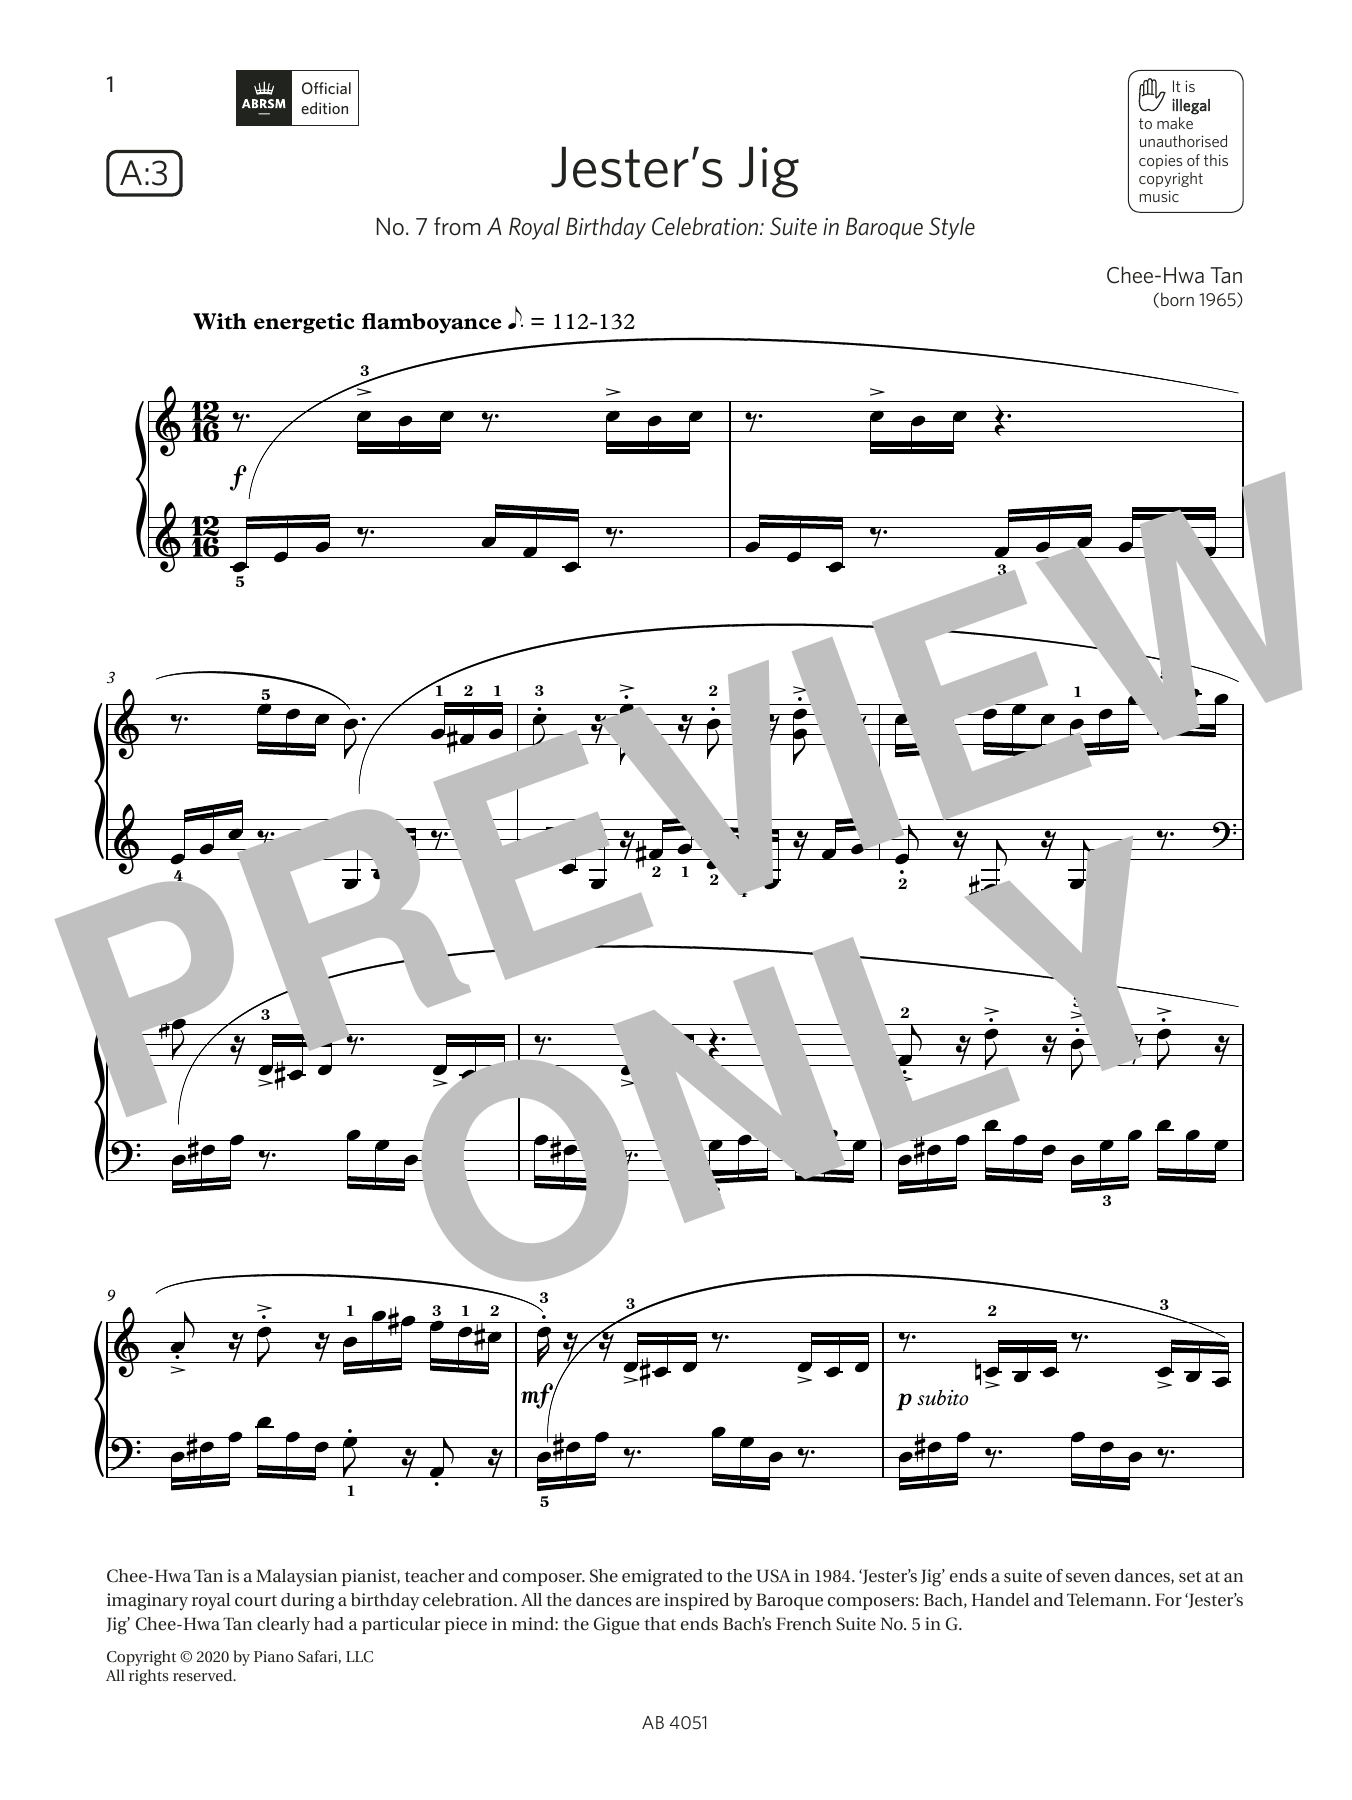 Download Chee-Hwa Tan Jester's Jig (Grade 5, list A3, from th Sheet Music